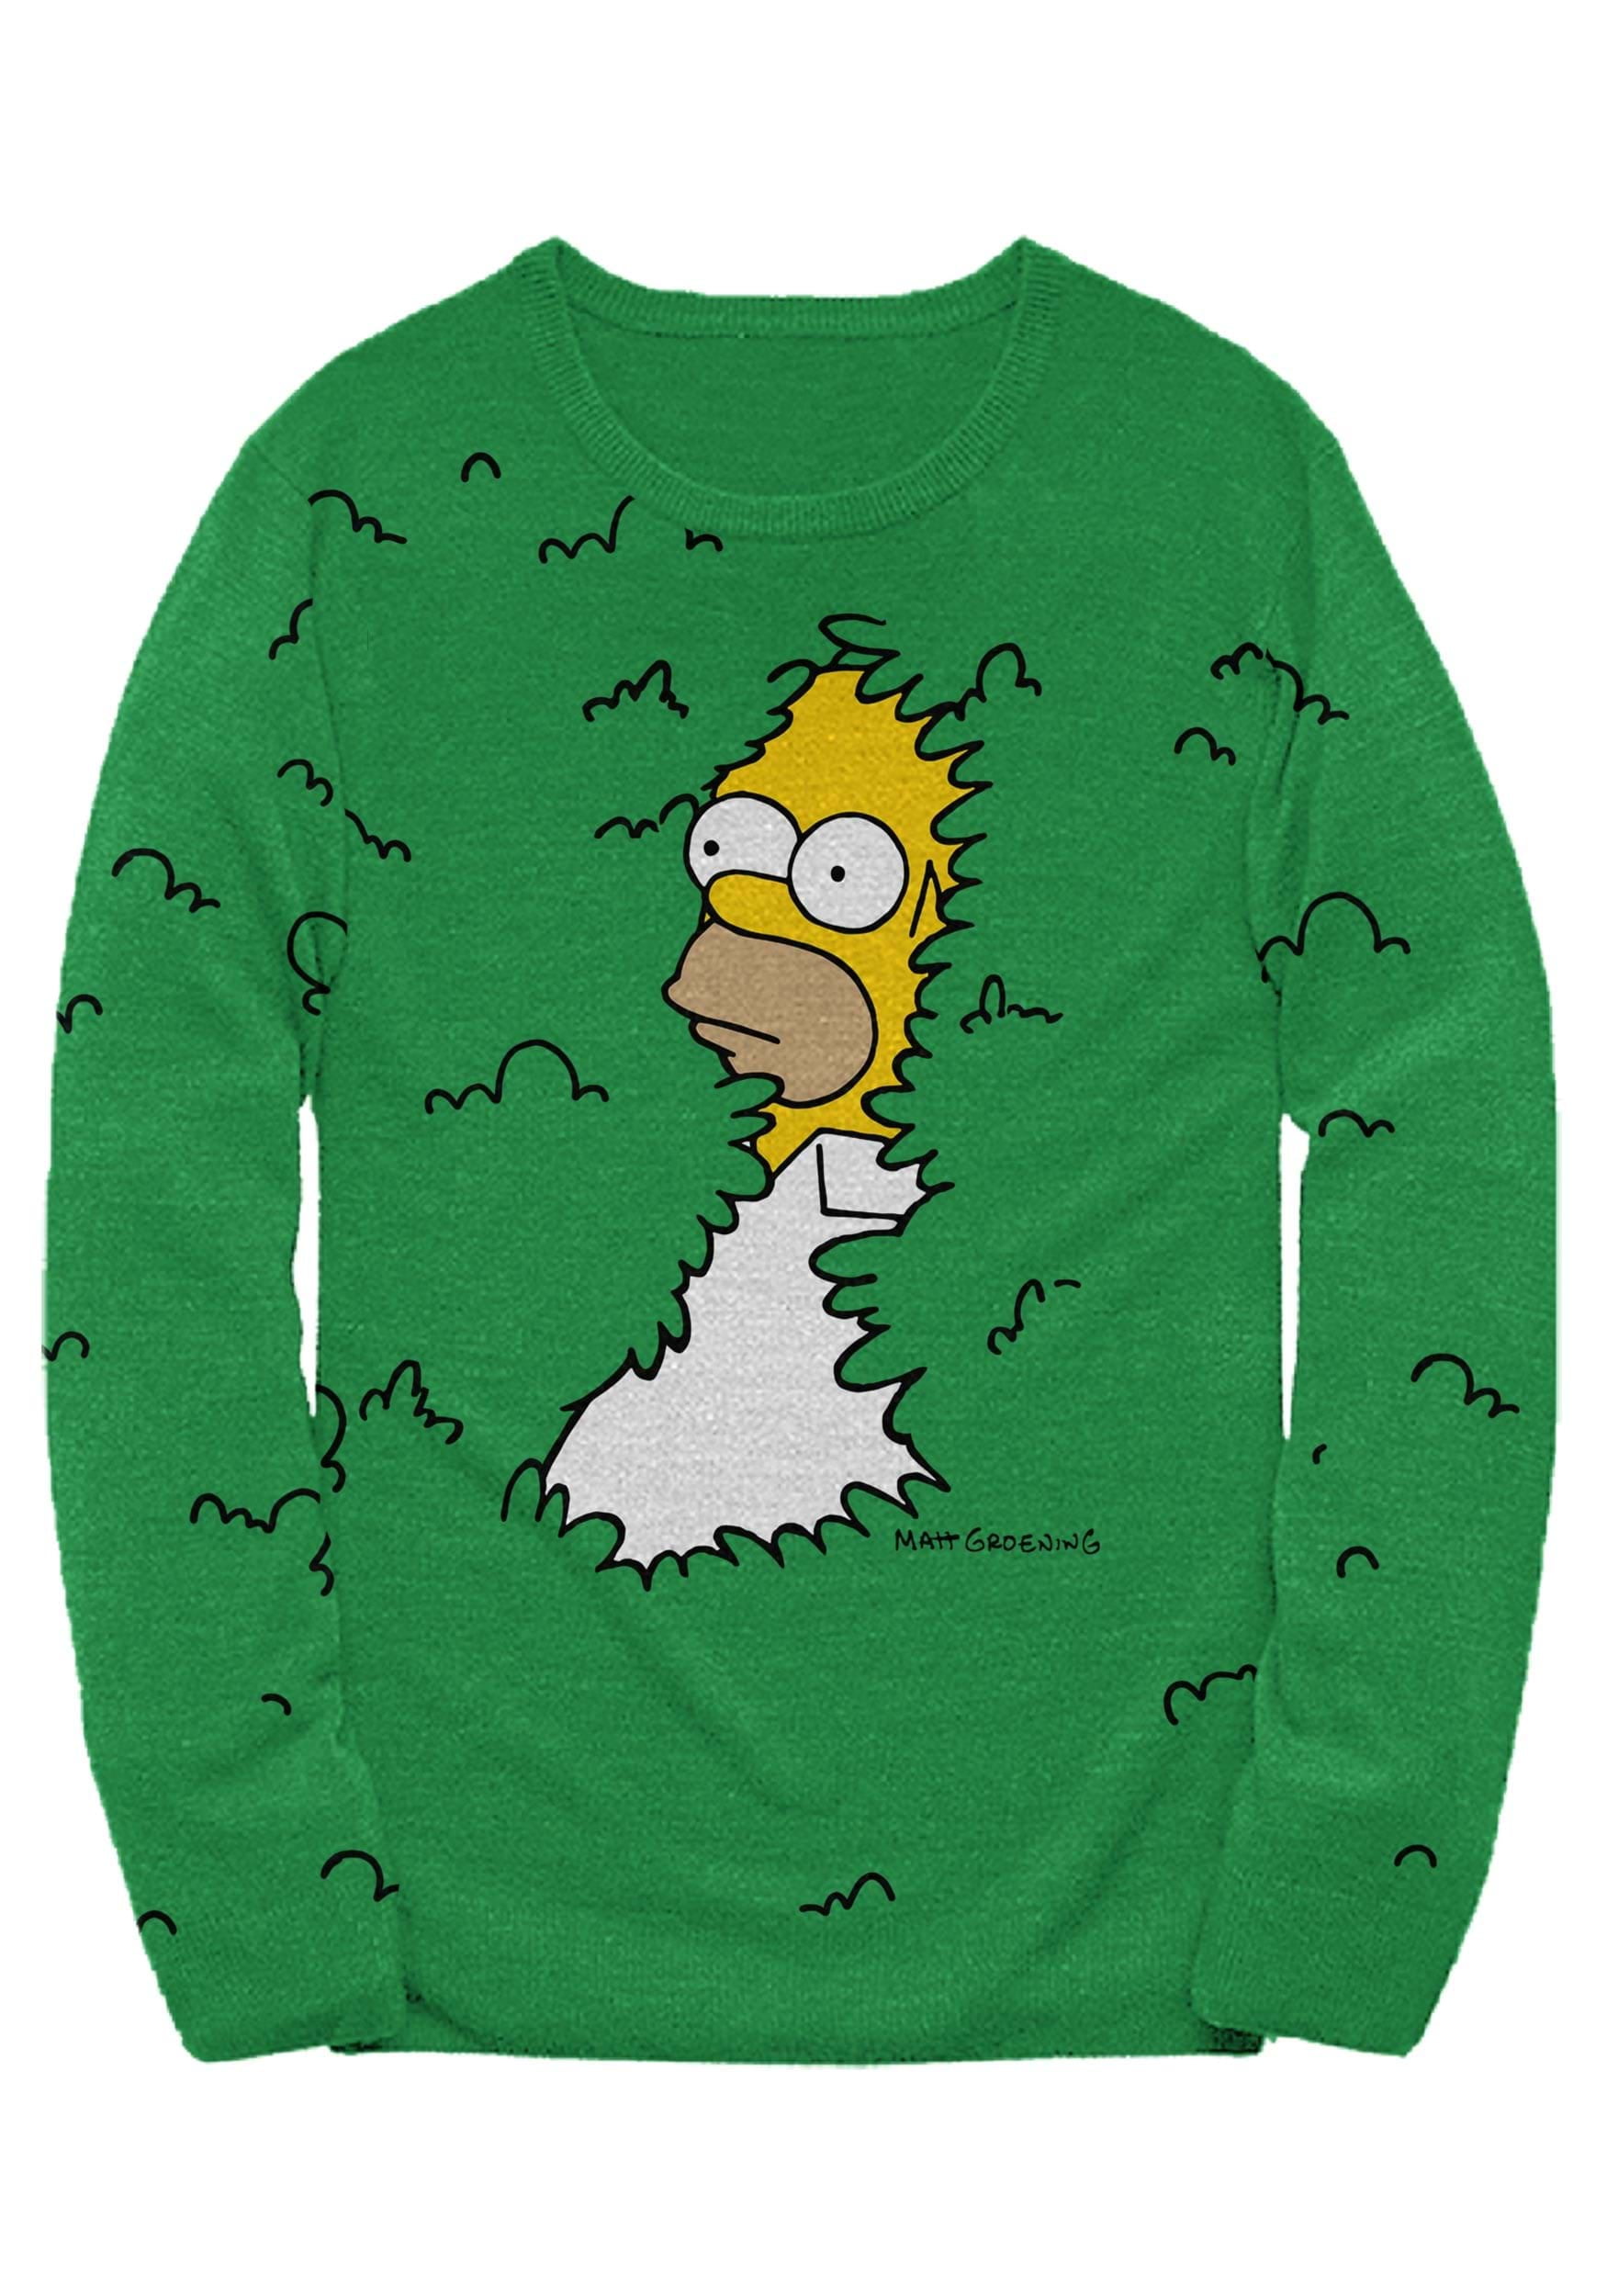 Adult The Simpsons Homer Bushes Sweater - Walmart.com